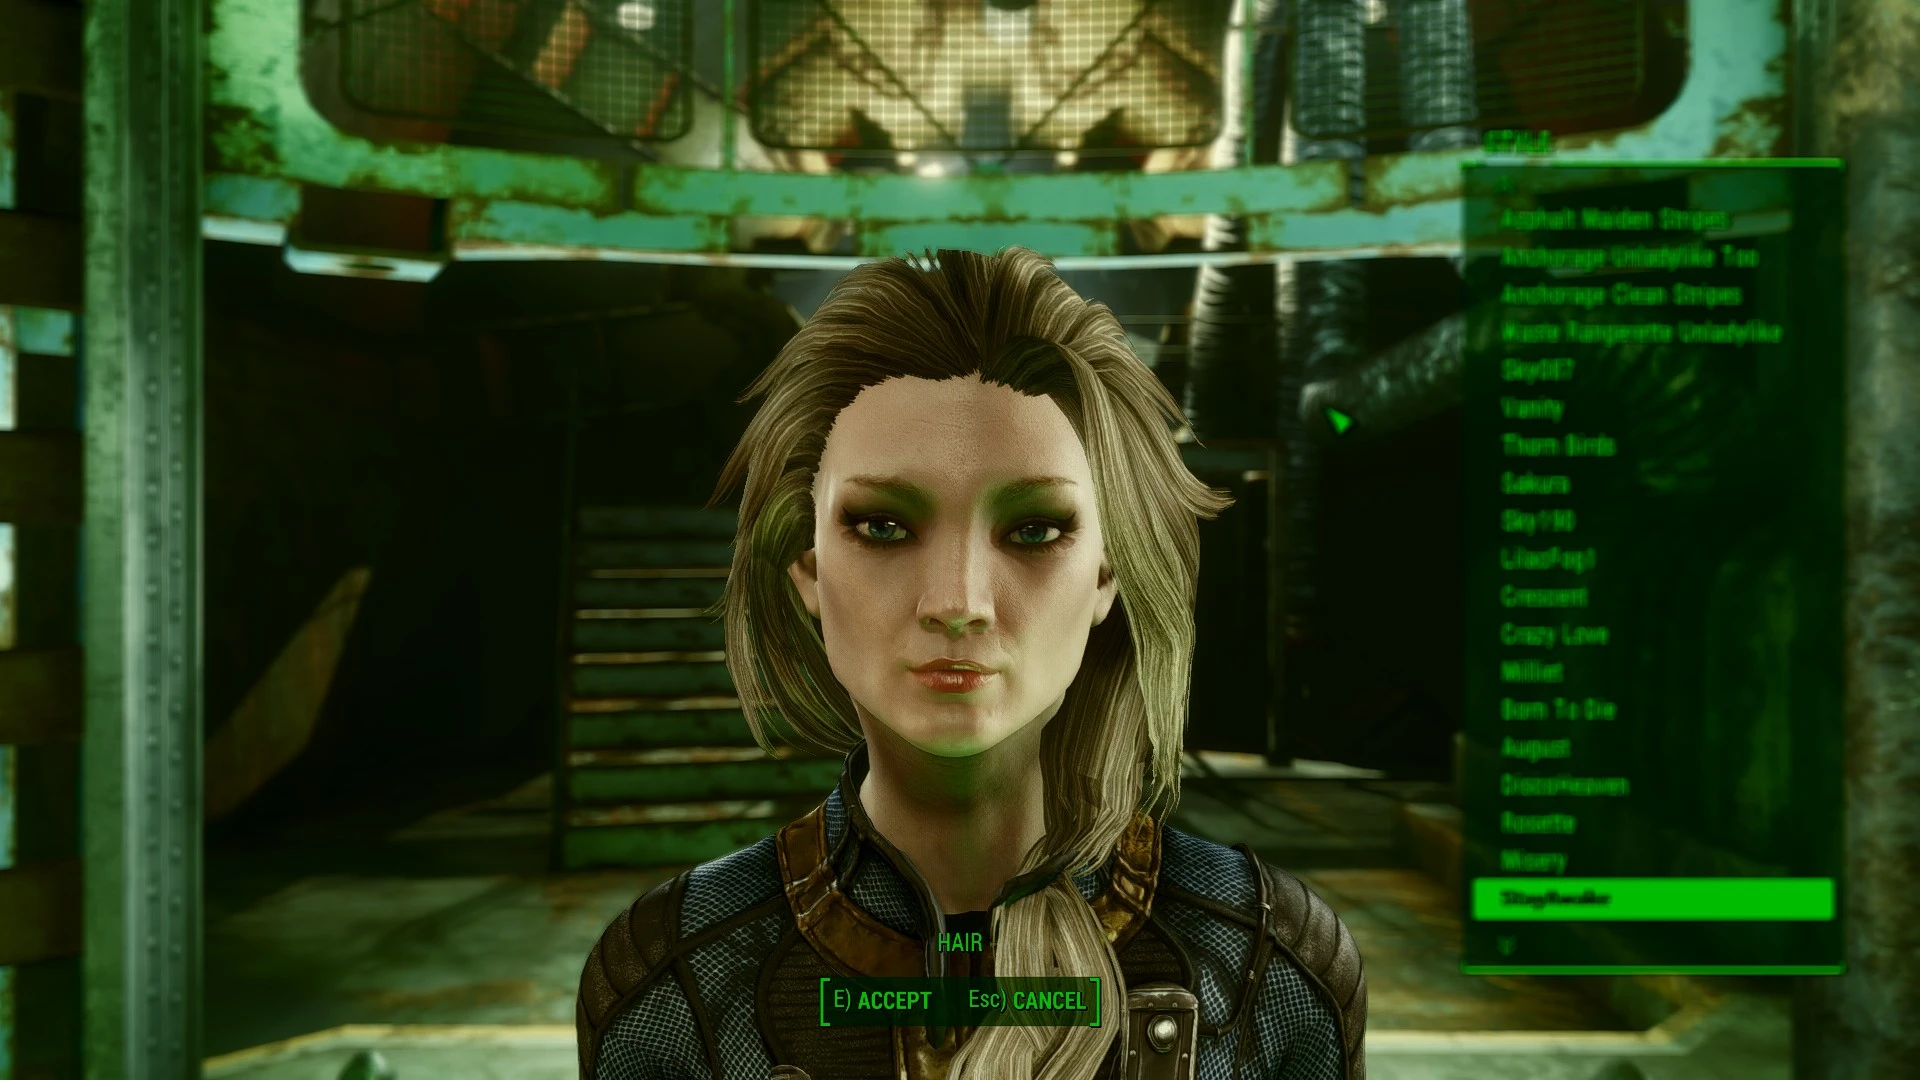 Project Valkyrie at Fallout 4 Nexus - Mods and community